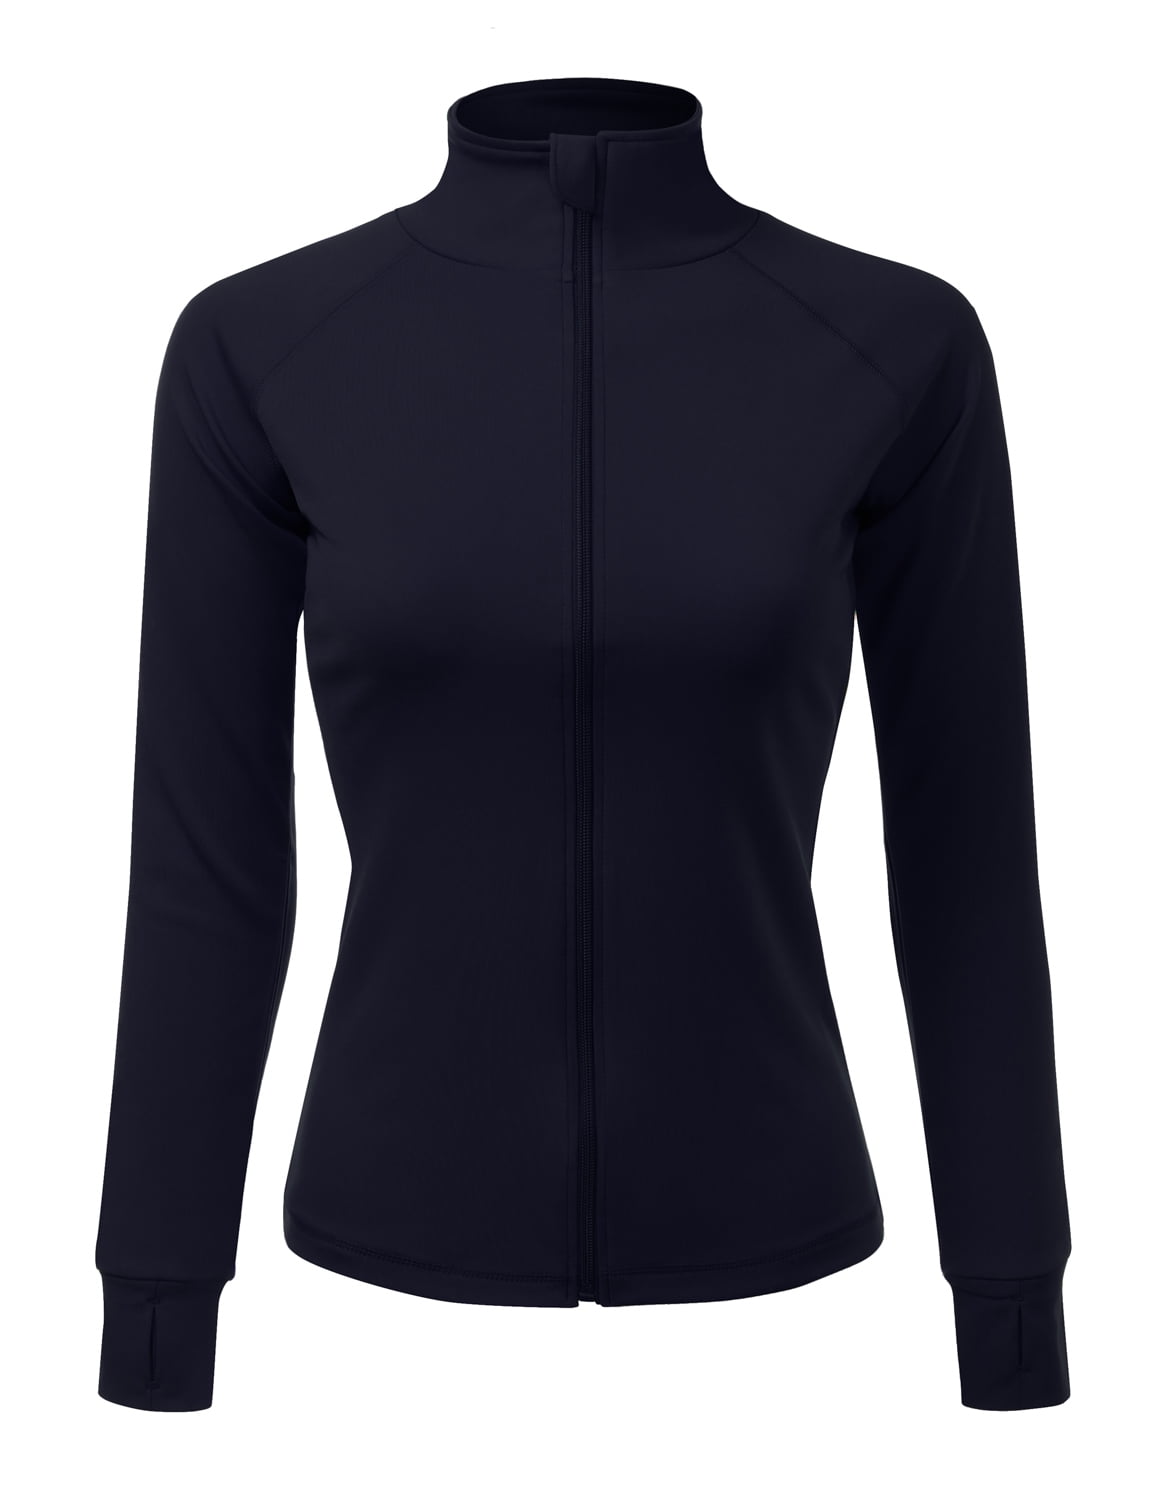 DISHANG Women’s Slim Fit Lightweight Workout Yoga Jacket Full Zip Running Track Jacket with Thumb Holes 